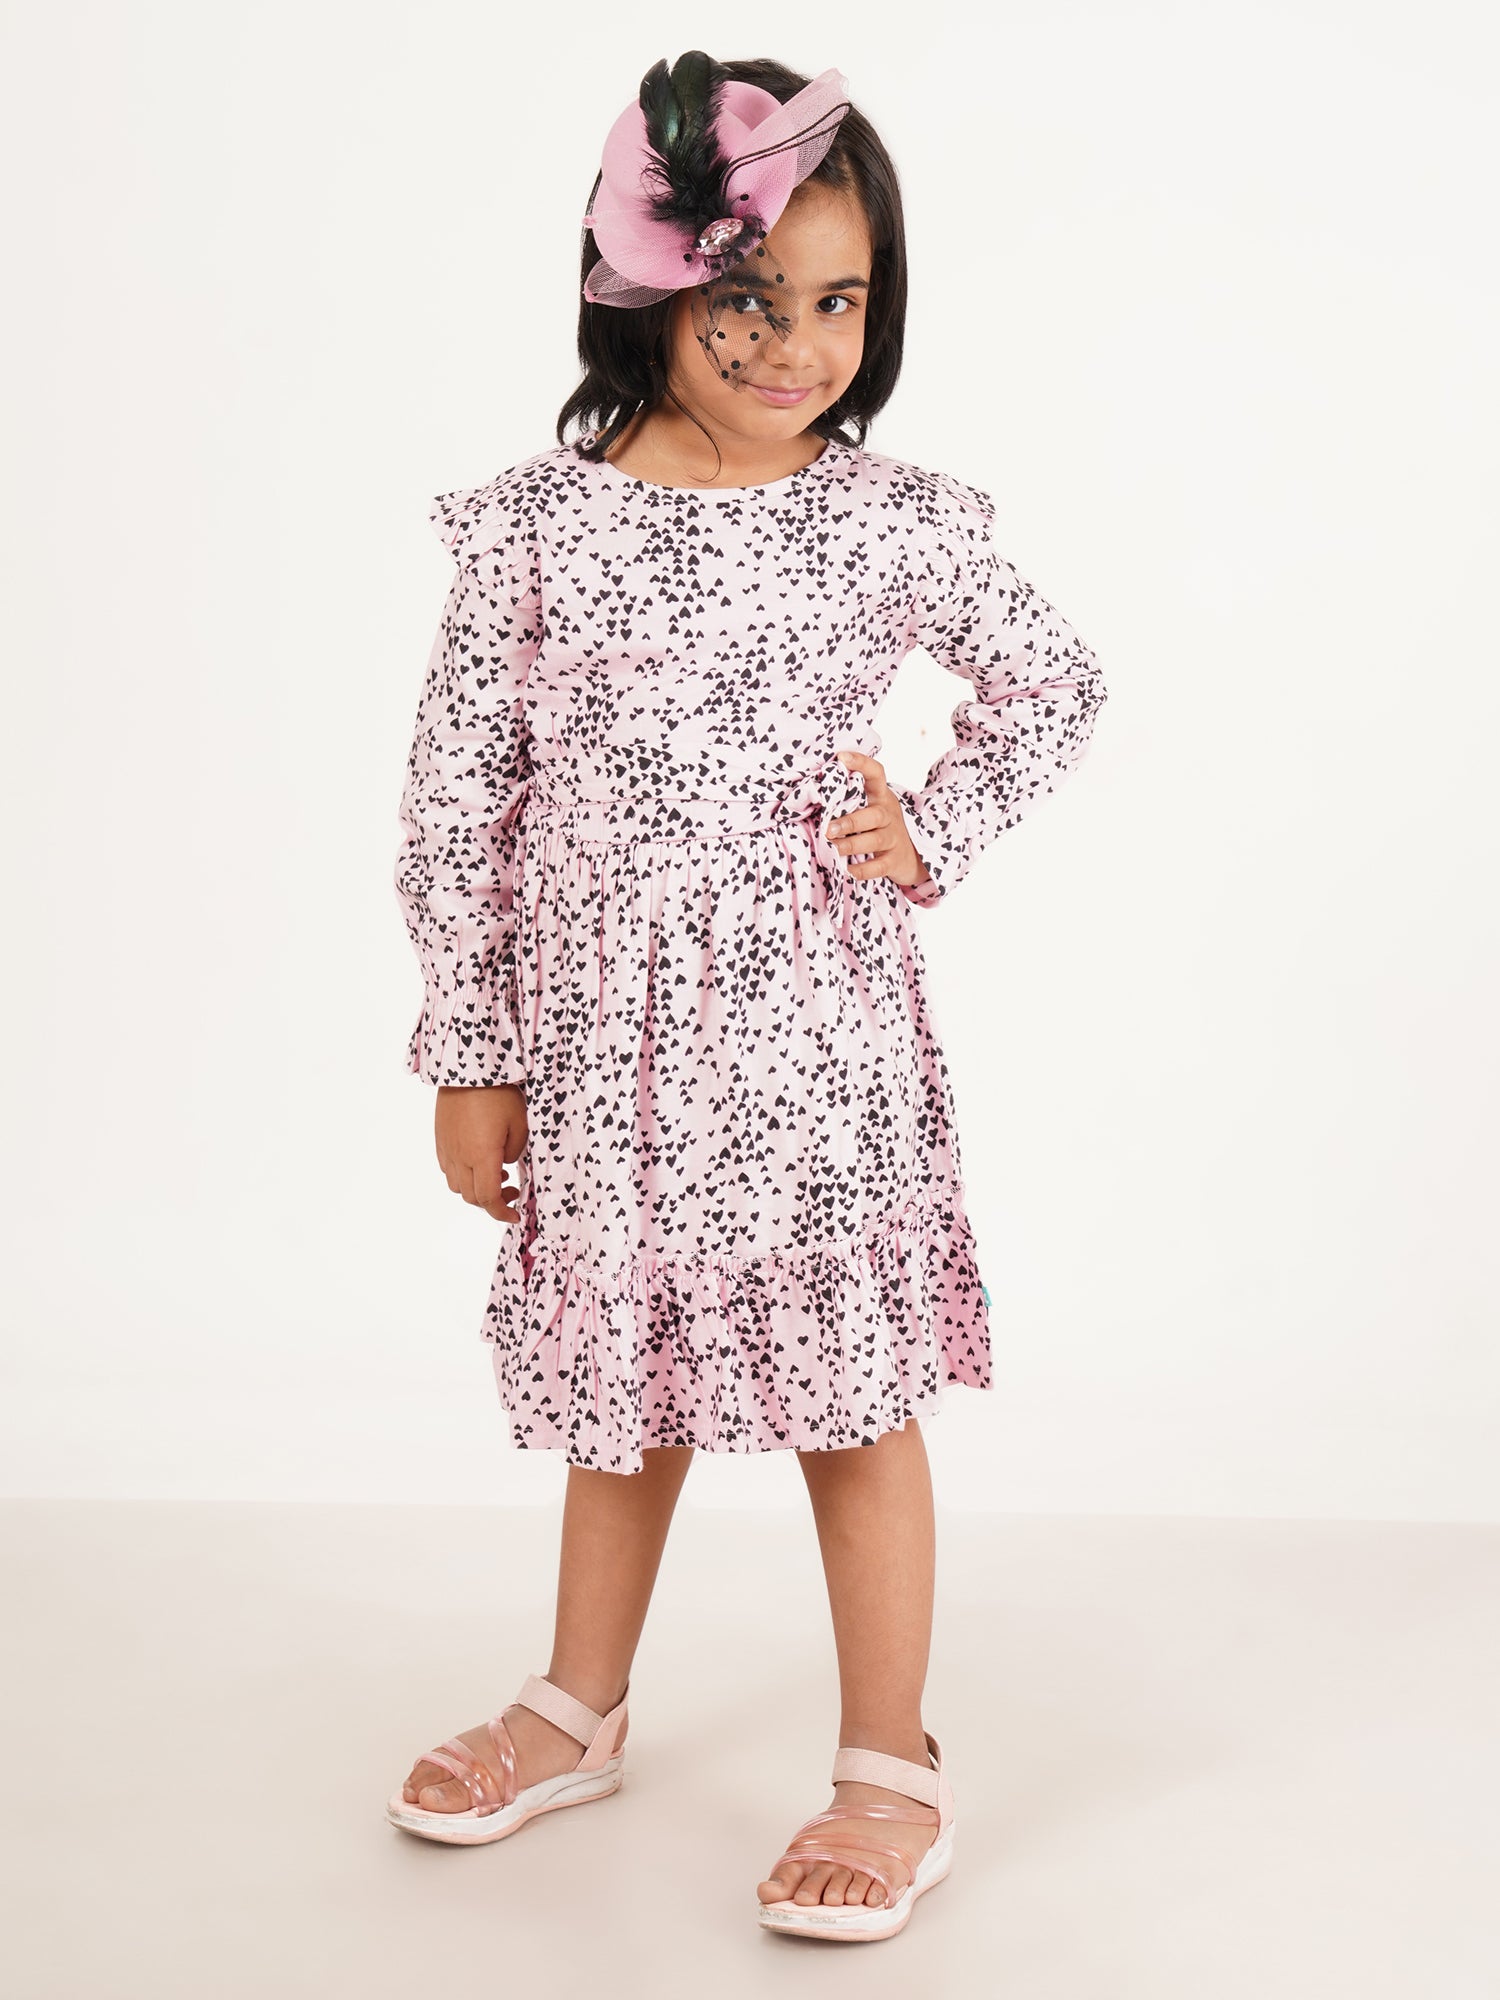 Young Girls All Over Printed Dress